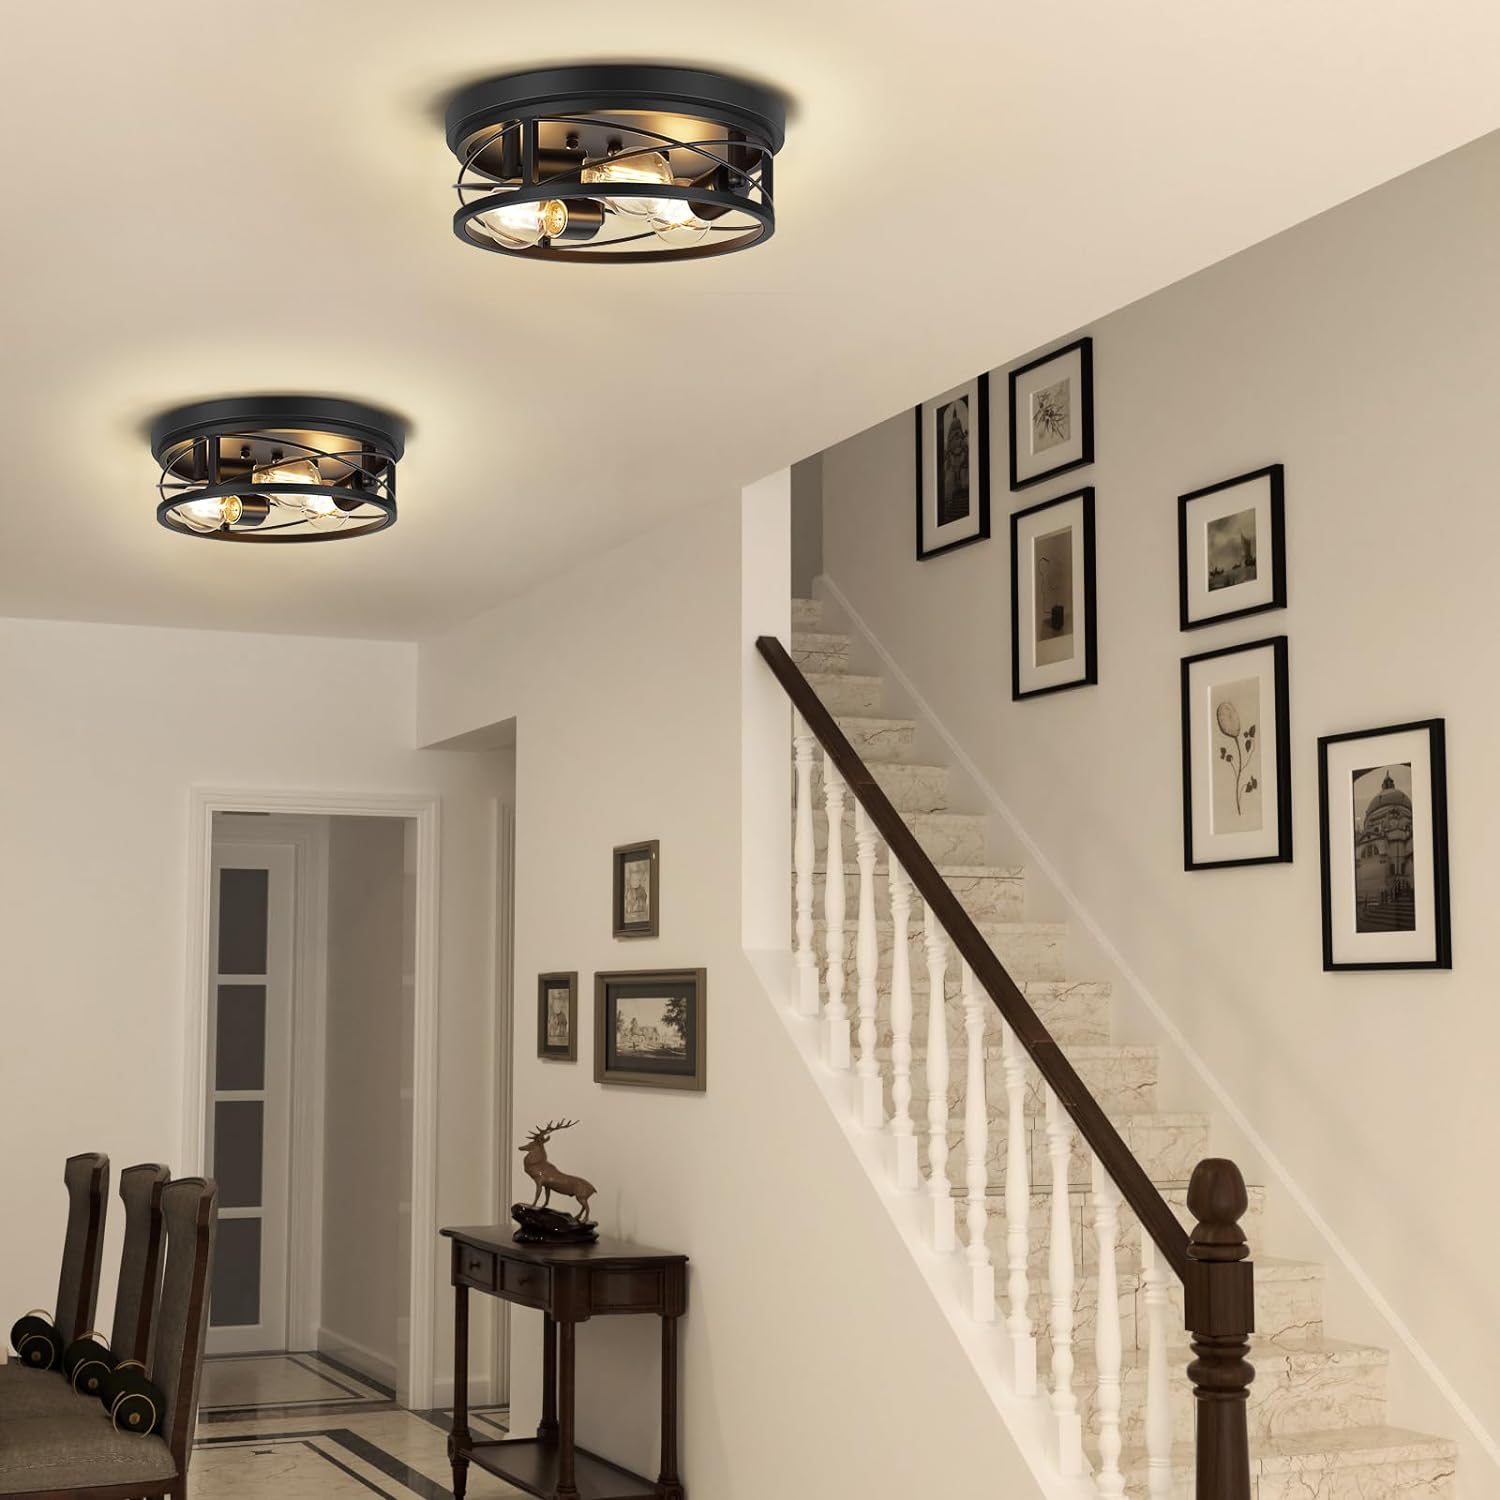 Low Ceiling, High Style: Flush Mount Lighting to Transform Any Room